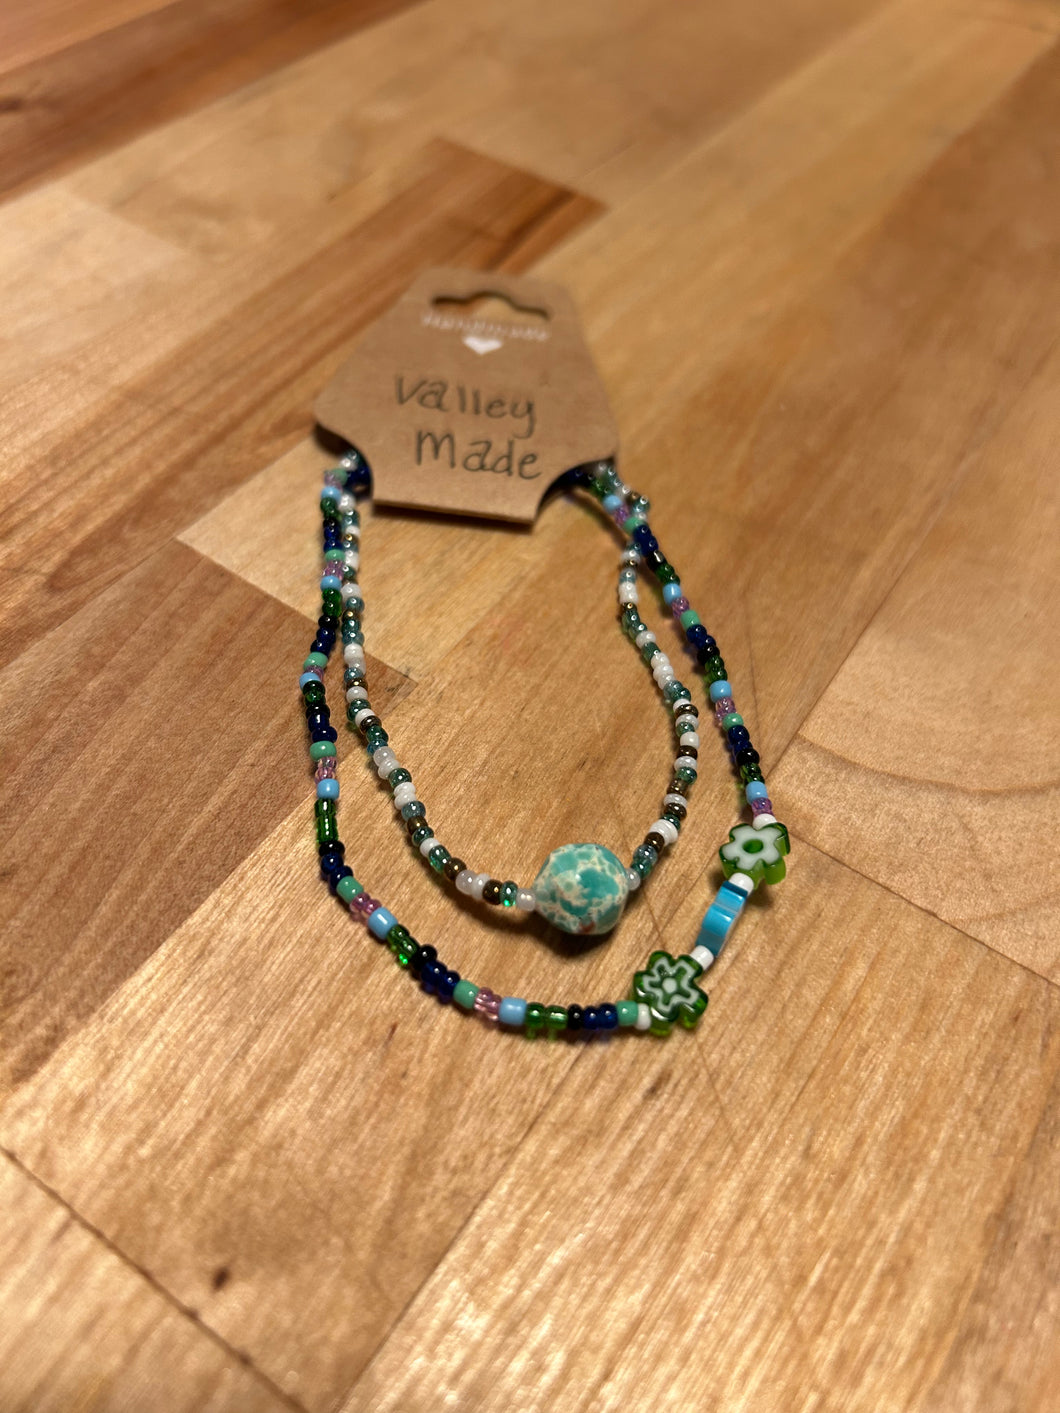 Beaded Jewelry- By: Valley Made